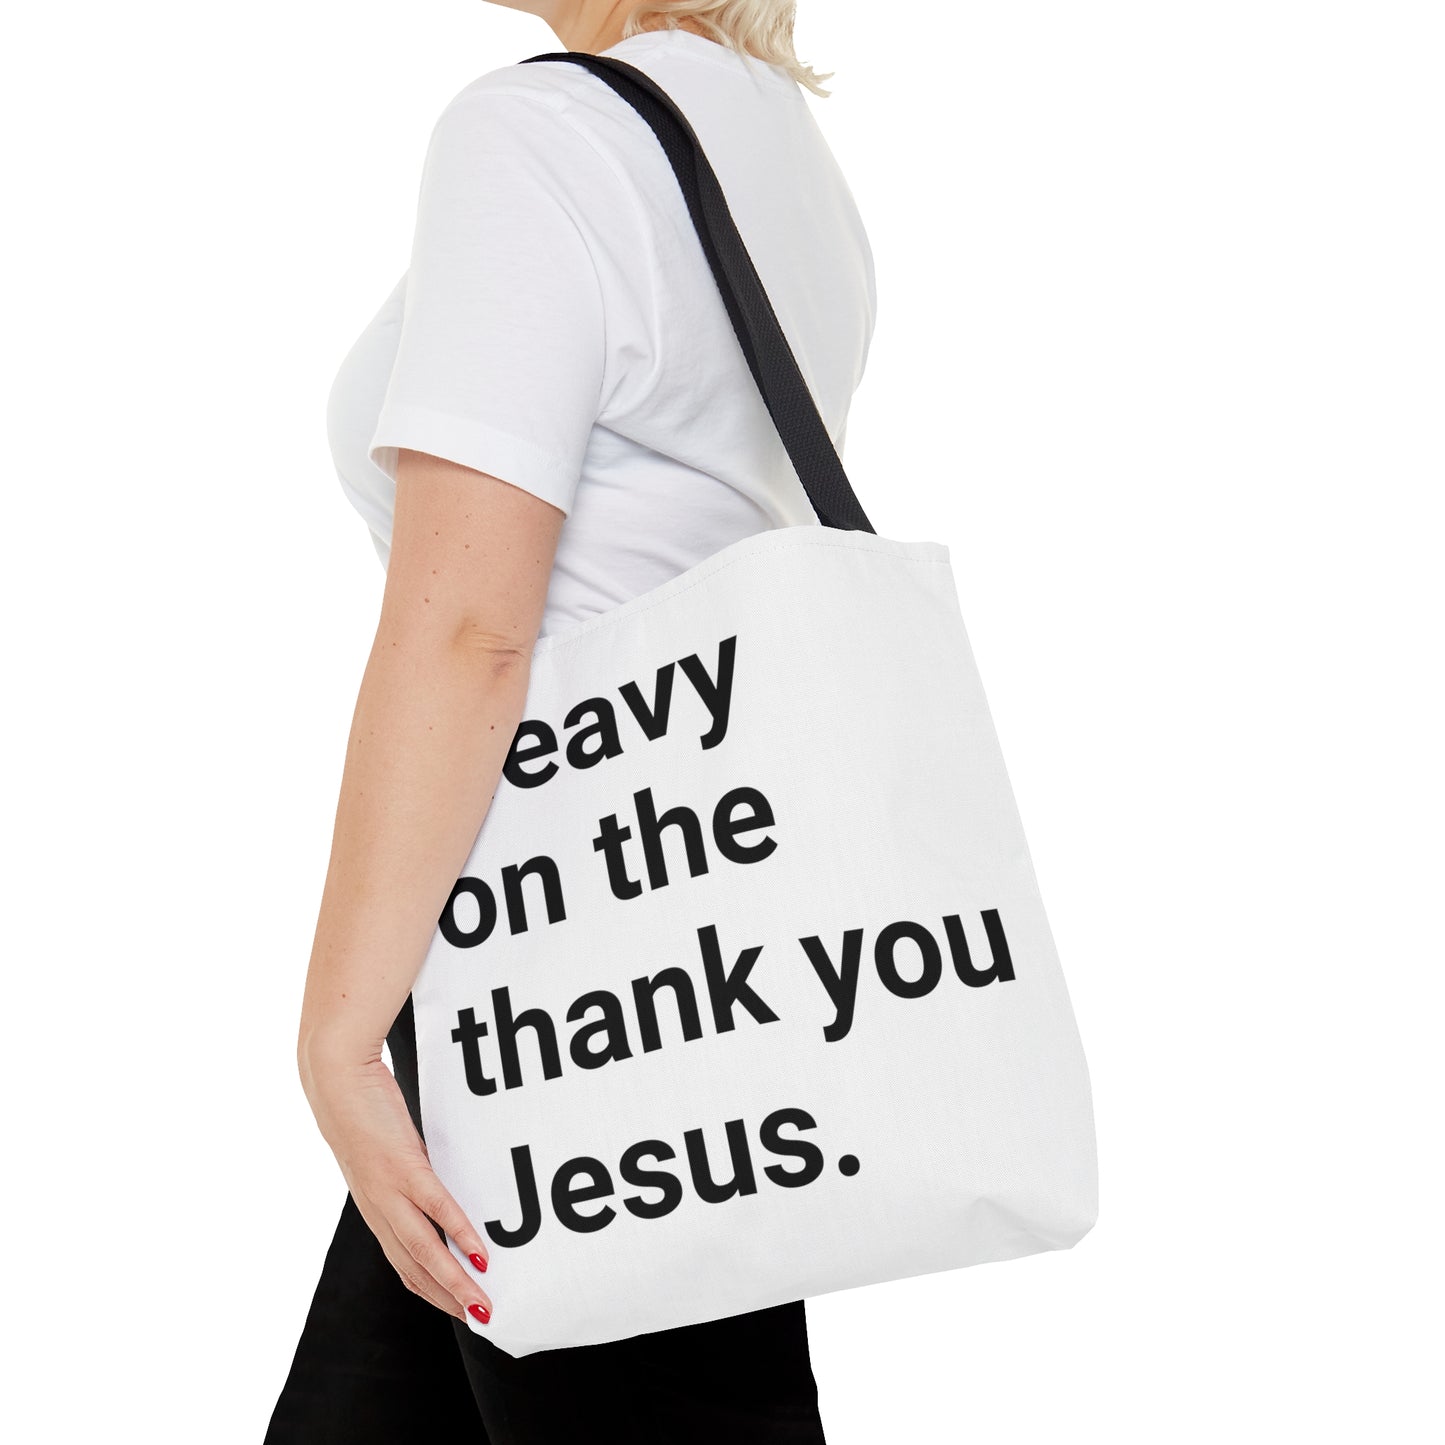 Heavy on the Thank you Jesus Tote Bag